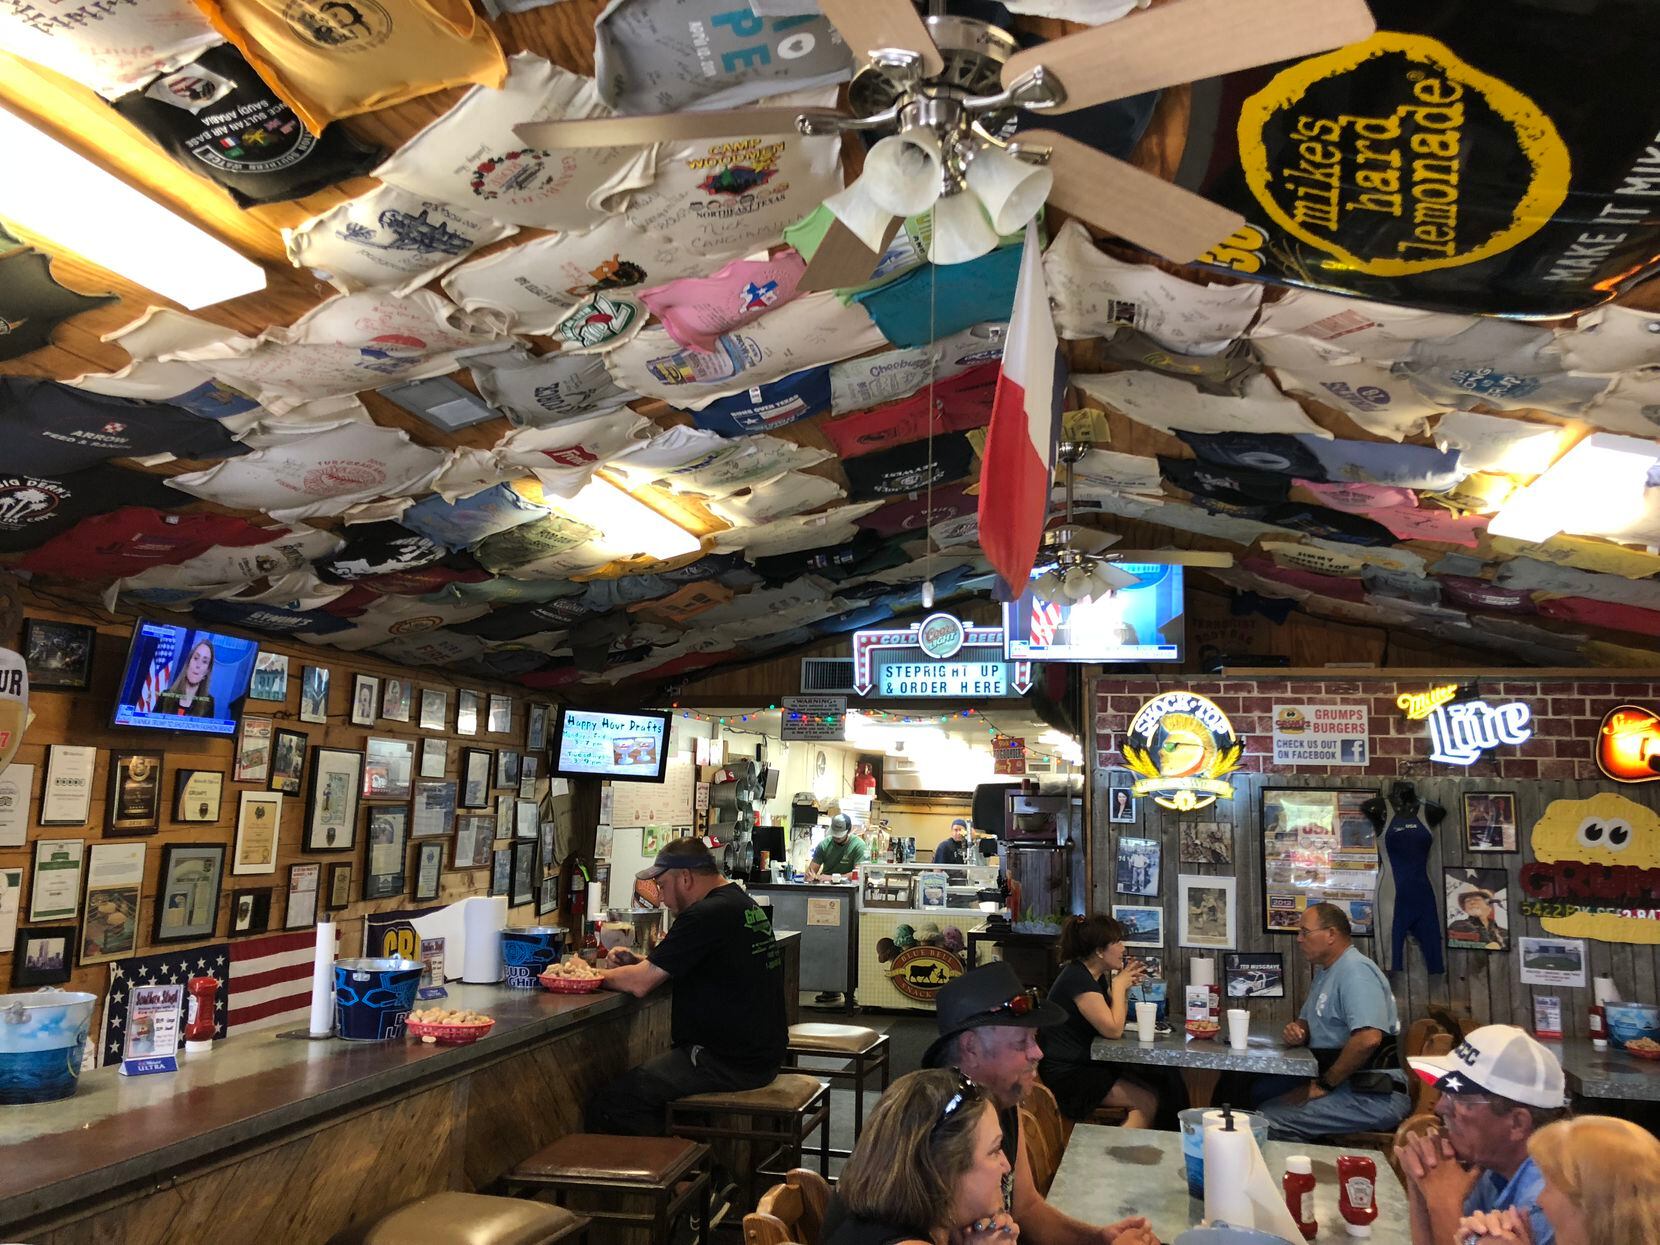 Grumps Burgers in Granbury shows off dozens of framed articles and awards that prove how many people like this place.